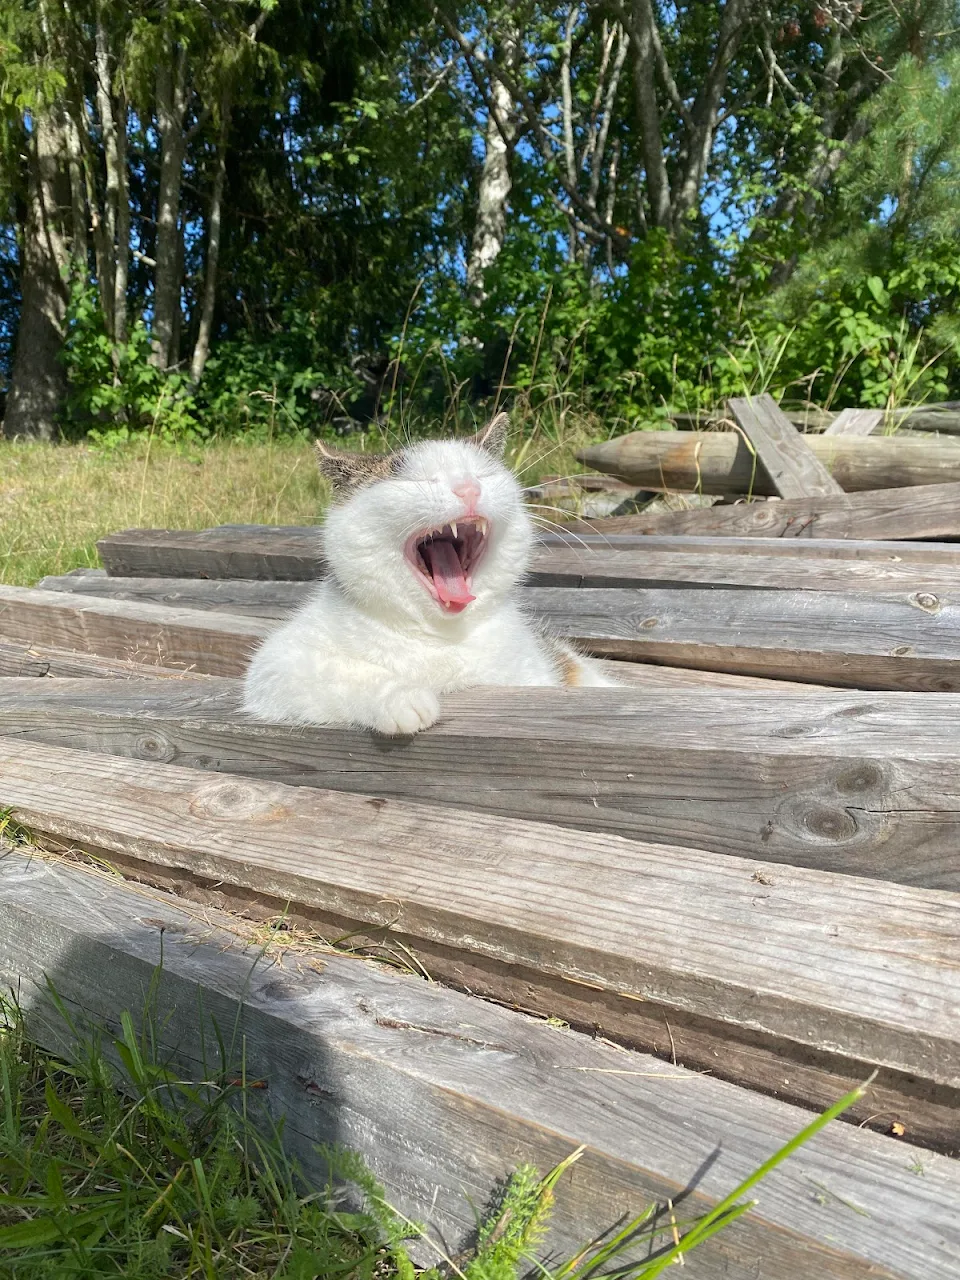 PsBattle: This cat yawning in the sun